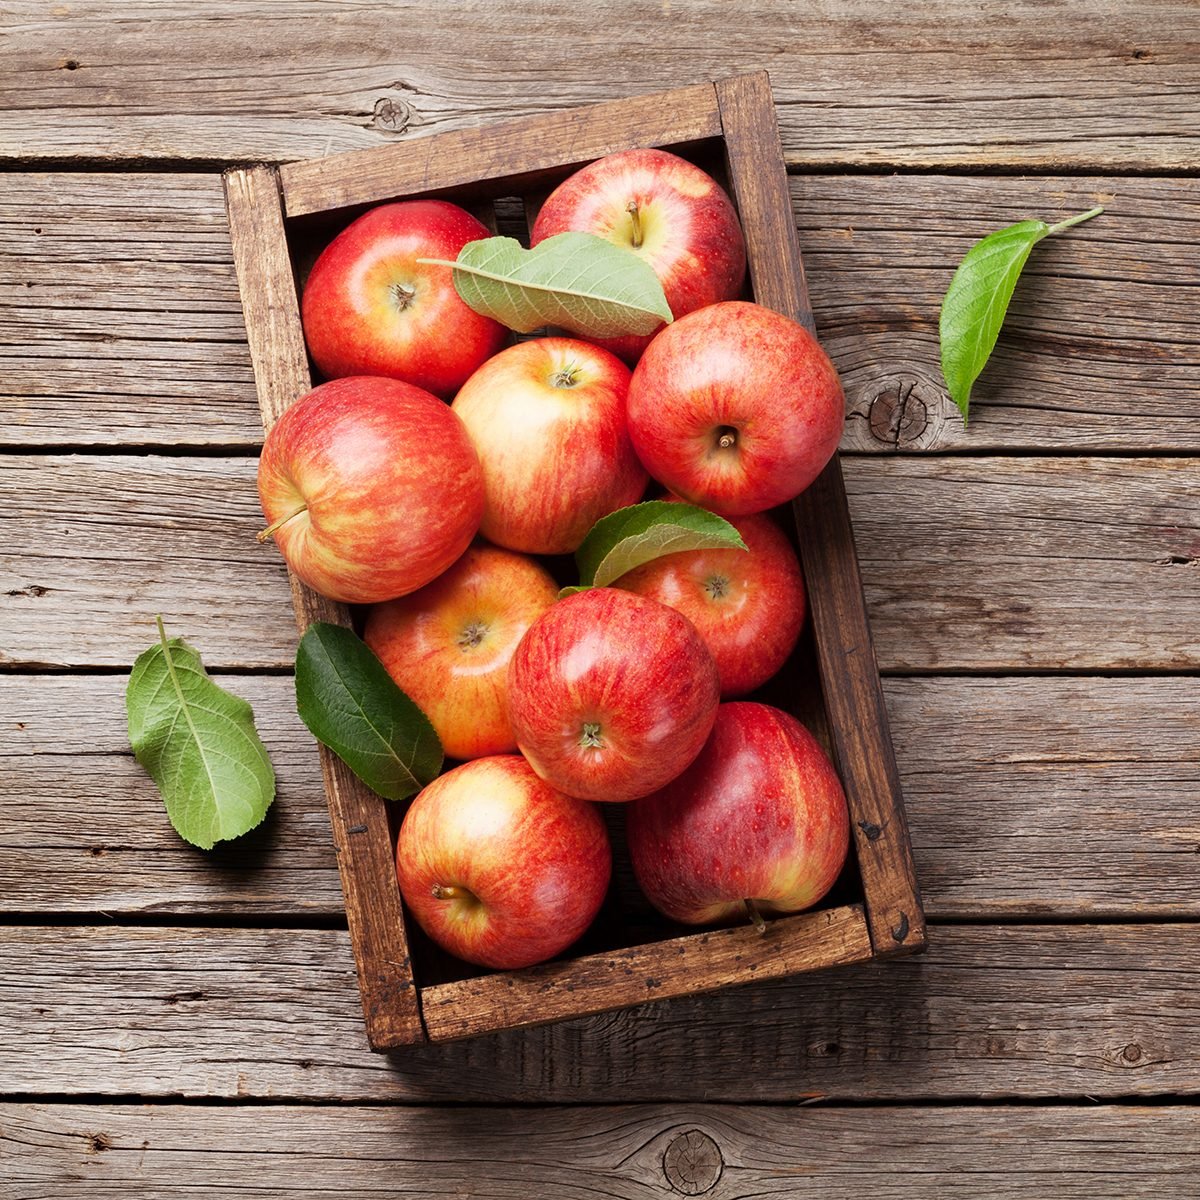 Ripe red apples in wooden box.